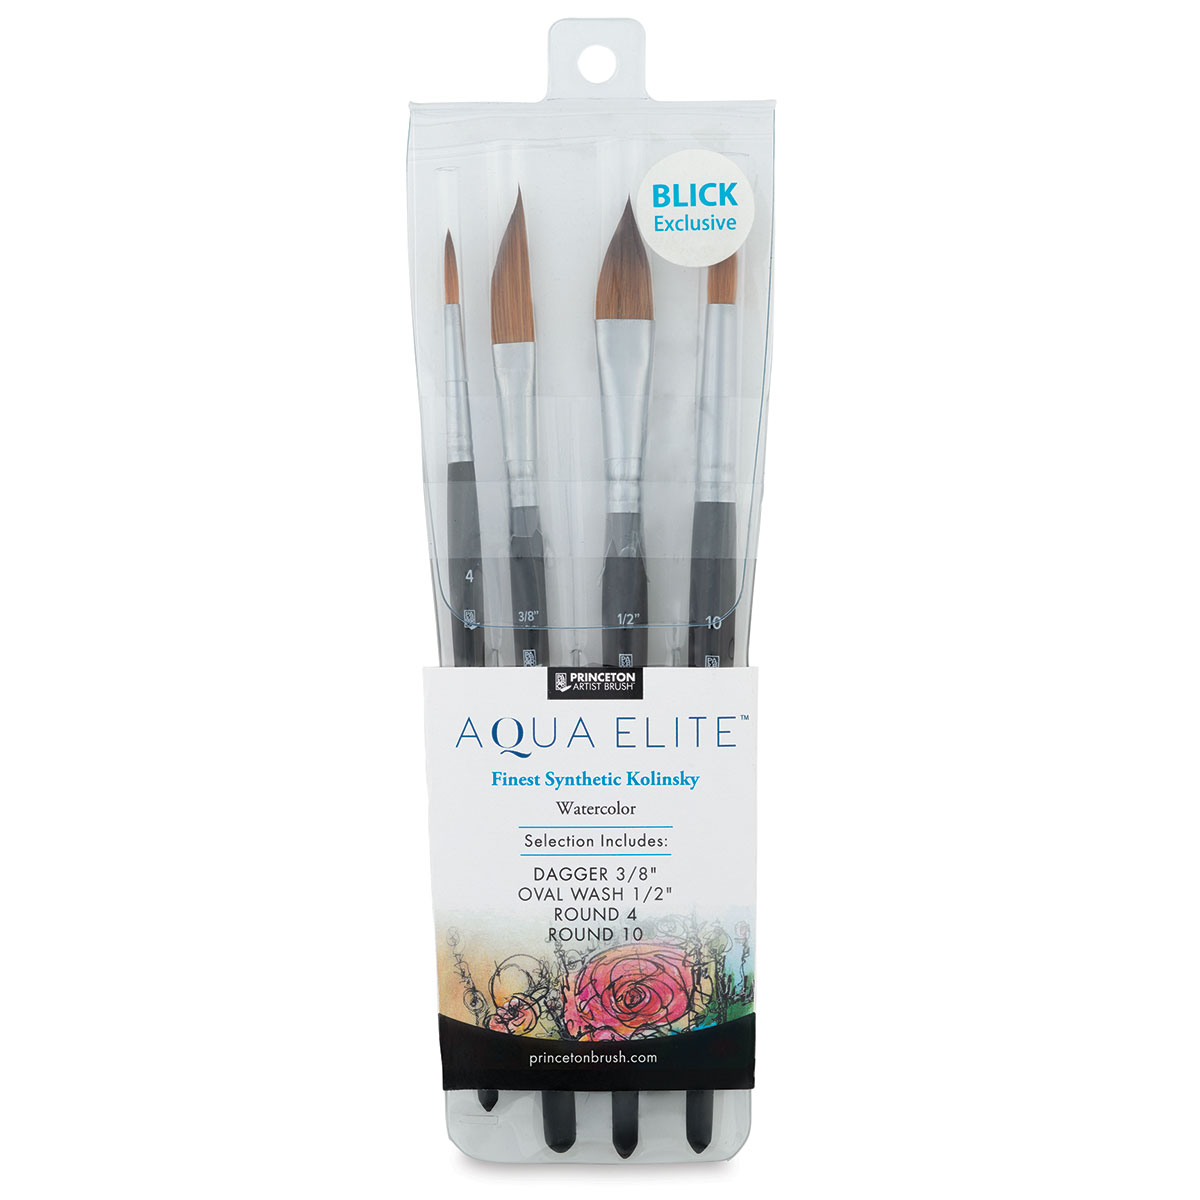 Which is the BEST Brush - Princeton Aqua Elite or Neptune? 